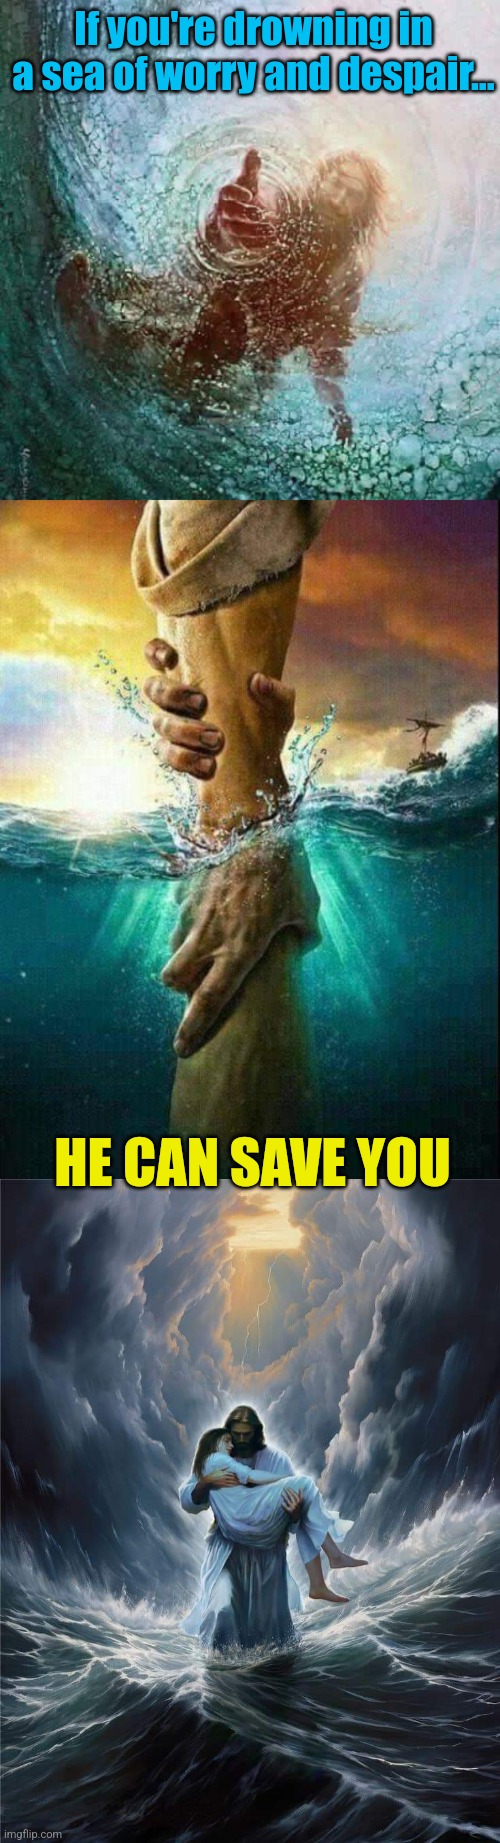 If you're drowning in a sea of worry and despair... HE CAN SAVE YOU | made w/ Imgflip meme maker